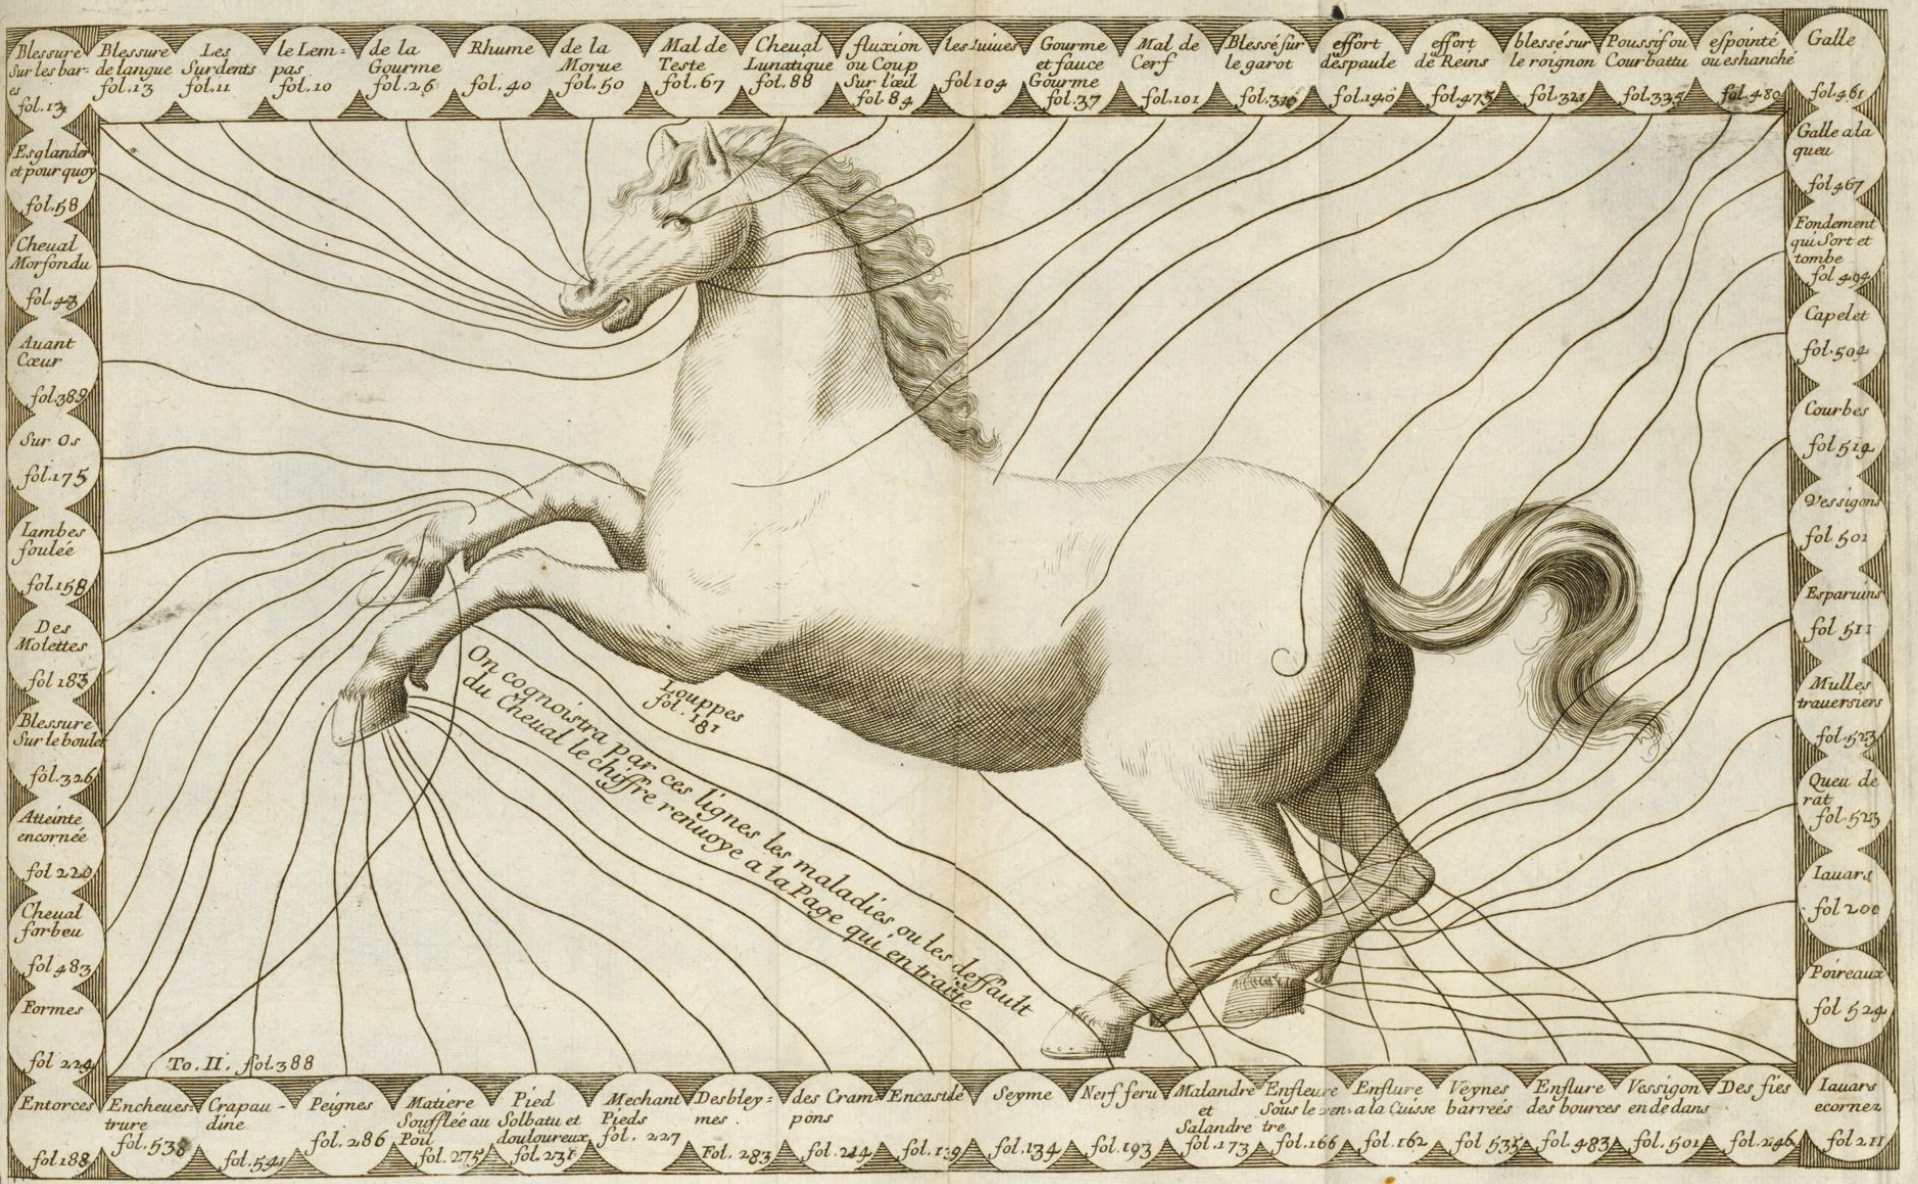 Image of a pale horse mid gallop. Protruding from nostrils, eyes, heels, hooves, and neck are lines. Each line strays outward, connecting a part of the horse's body to a particular horse ailment. One may find lunacy in a horse's eyes, and one may find the solution on folio 88.